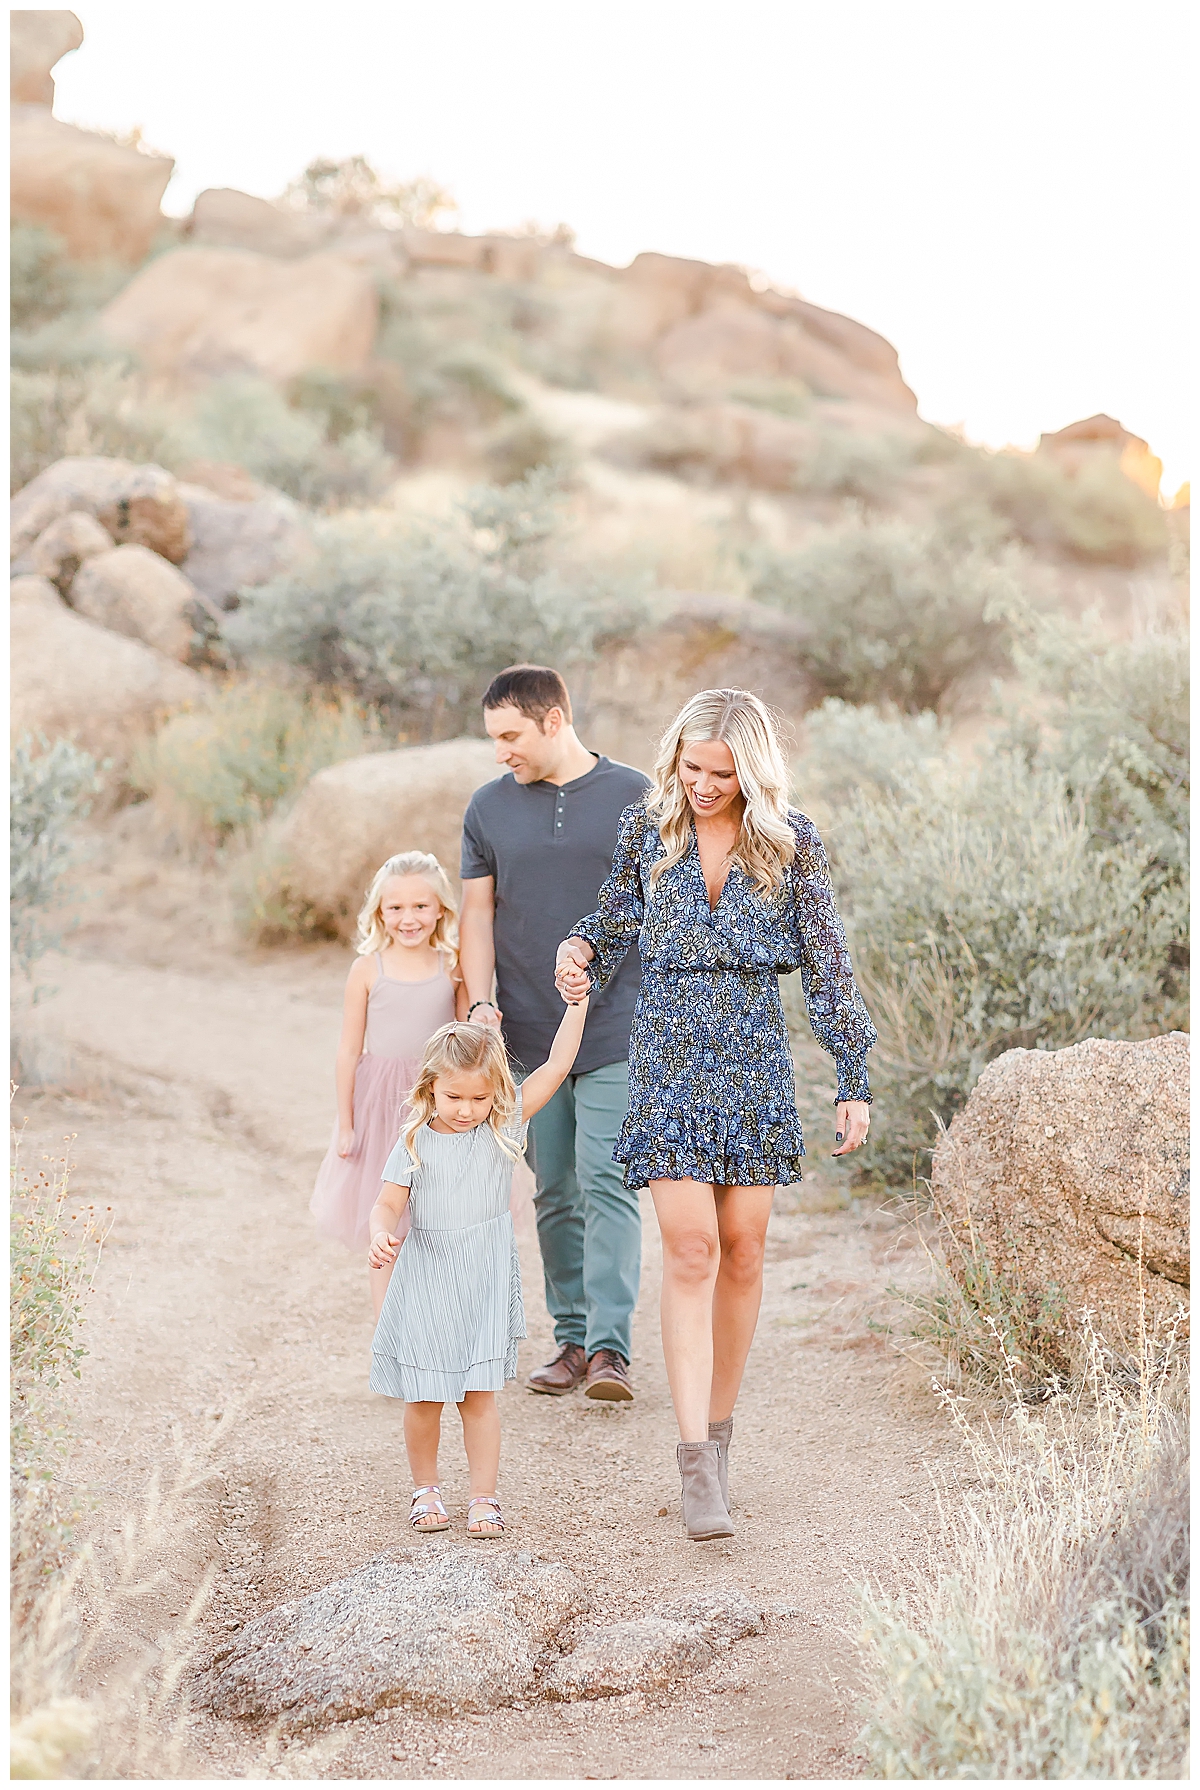 Family holding hands walking desert trail in Scottsdale, AZ photographed by Christine Deaton Creative